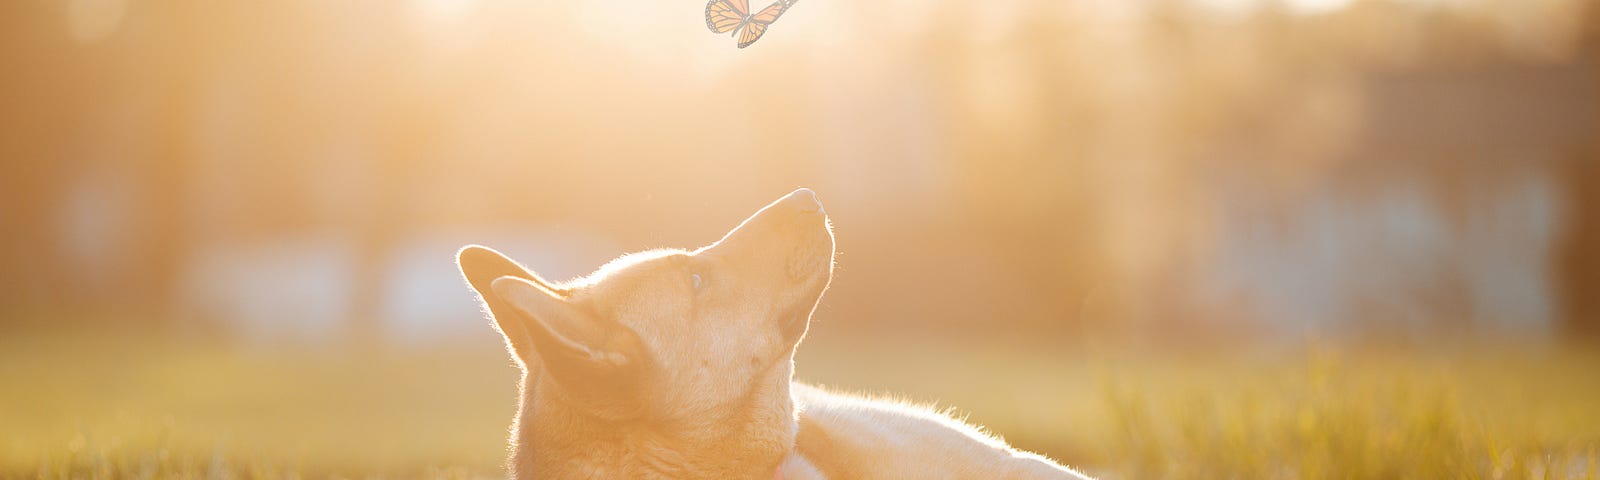 A dog lying on the grass, looking up at a butterfly overhead.